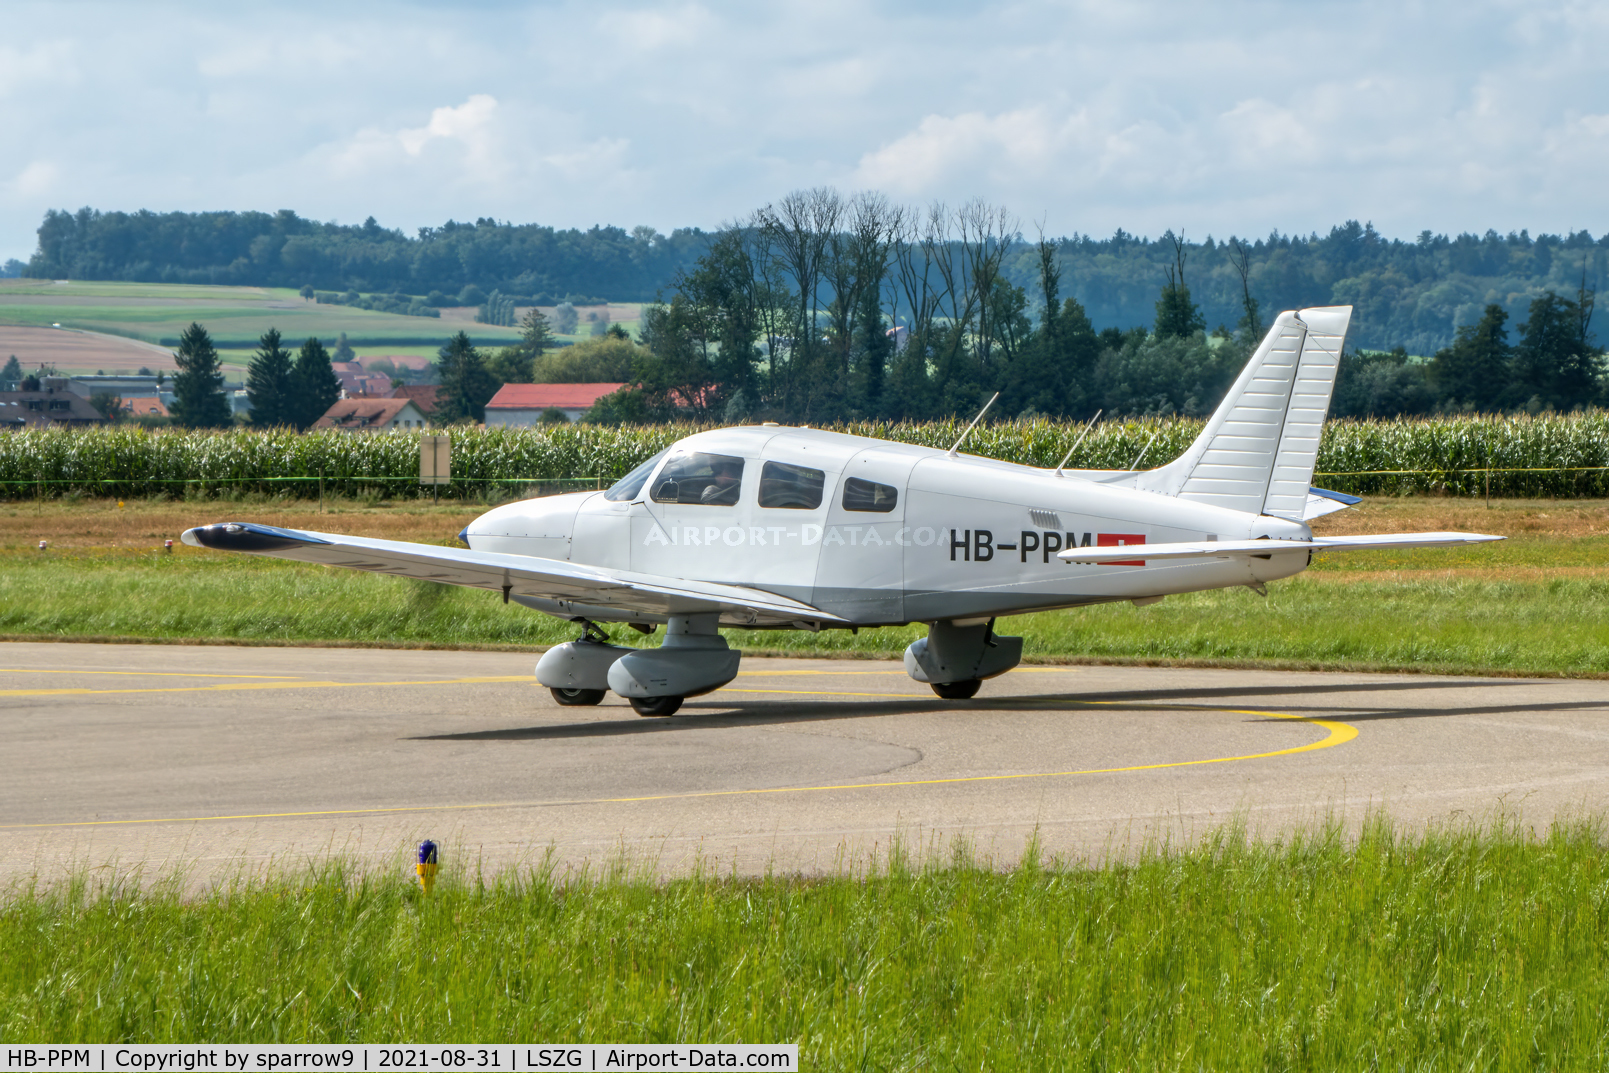 HB-PPM, 1997 Piper PA-28-181 Archer III C/N 2843095, At Grenchen. New paint-scheme. HB-registered since 1997-07-30